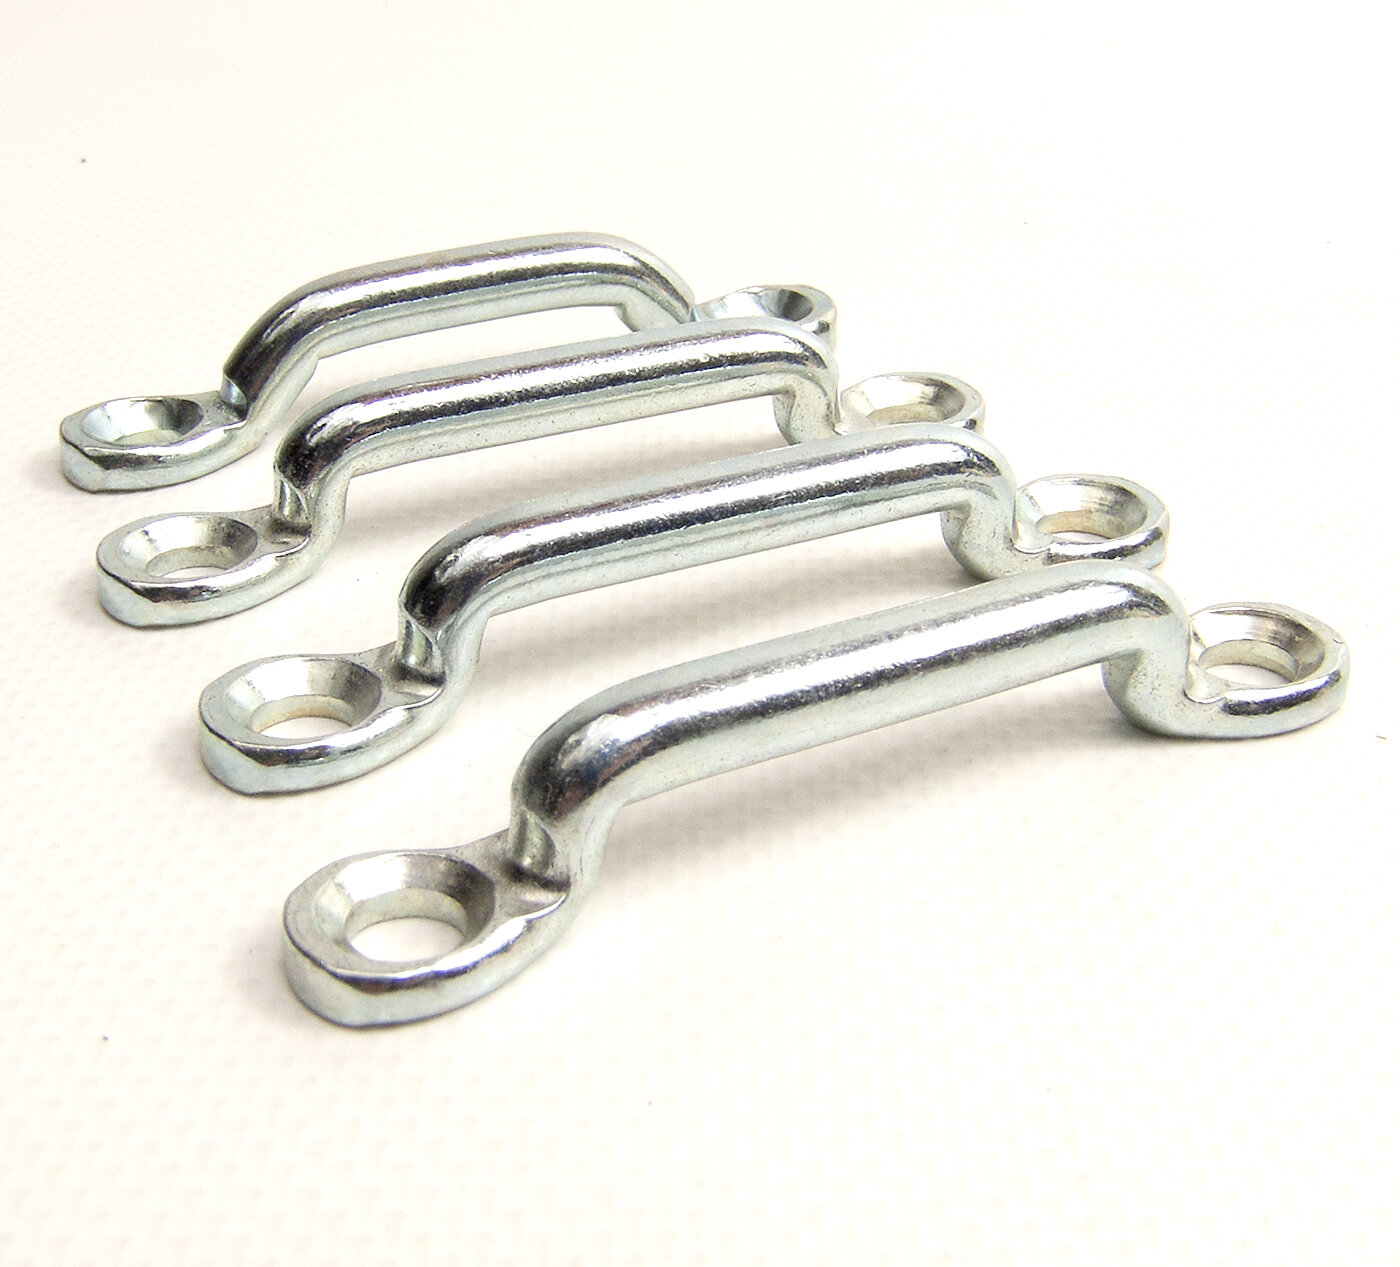 4pc/set Stainless Steel U-bolts Clamps